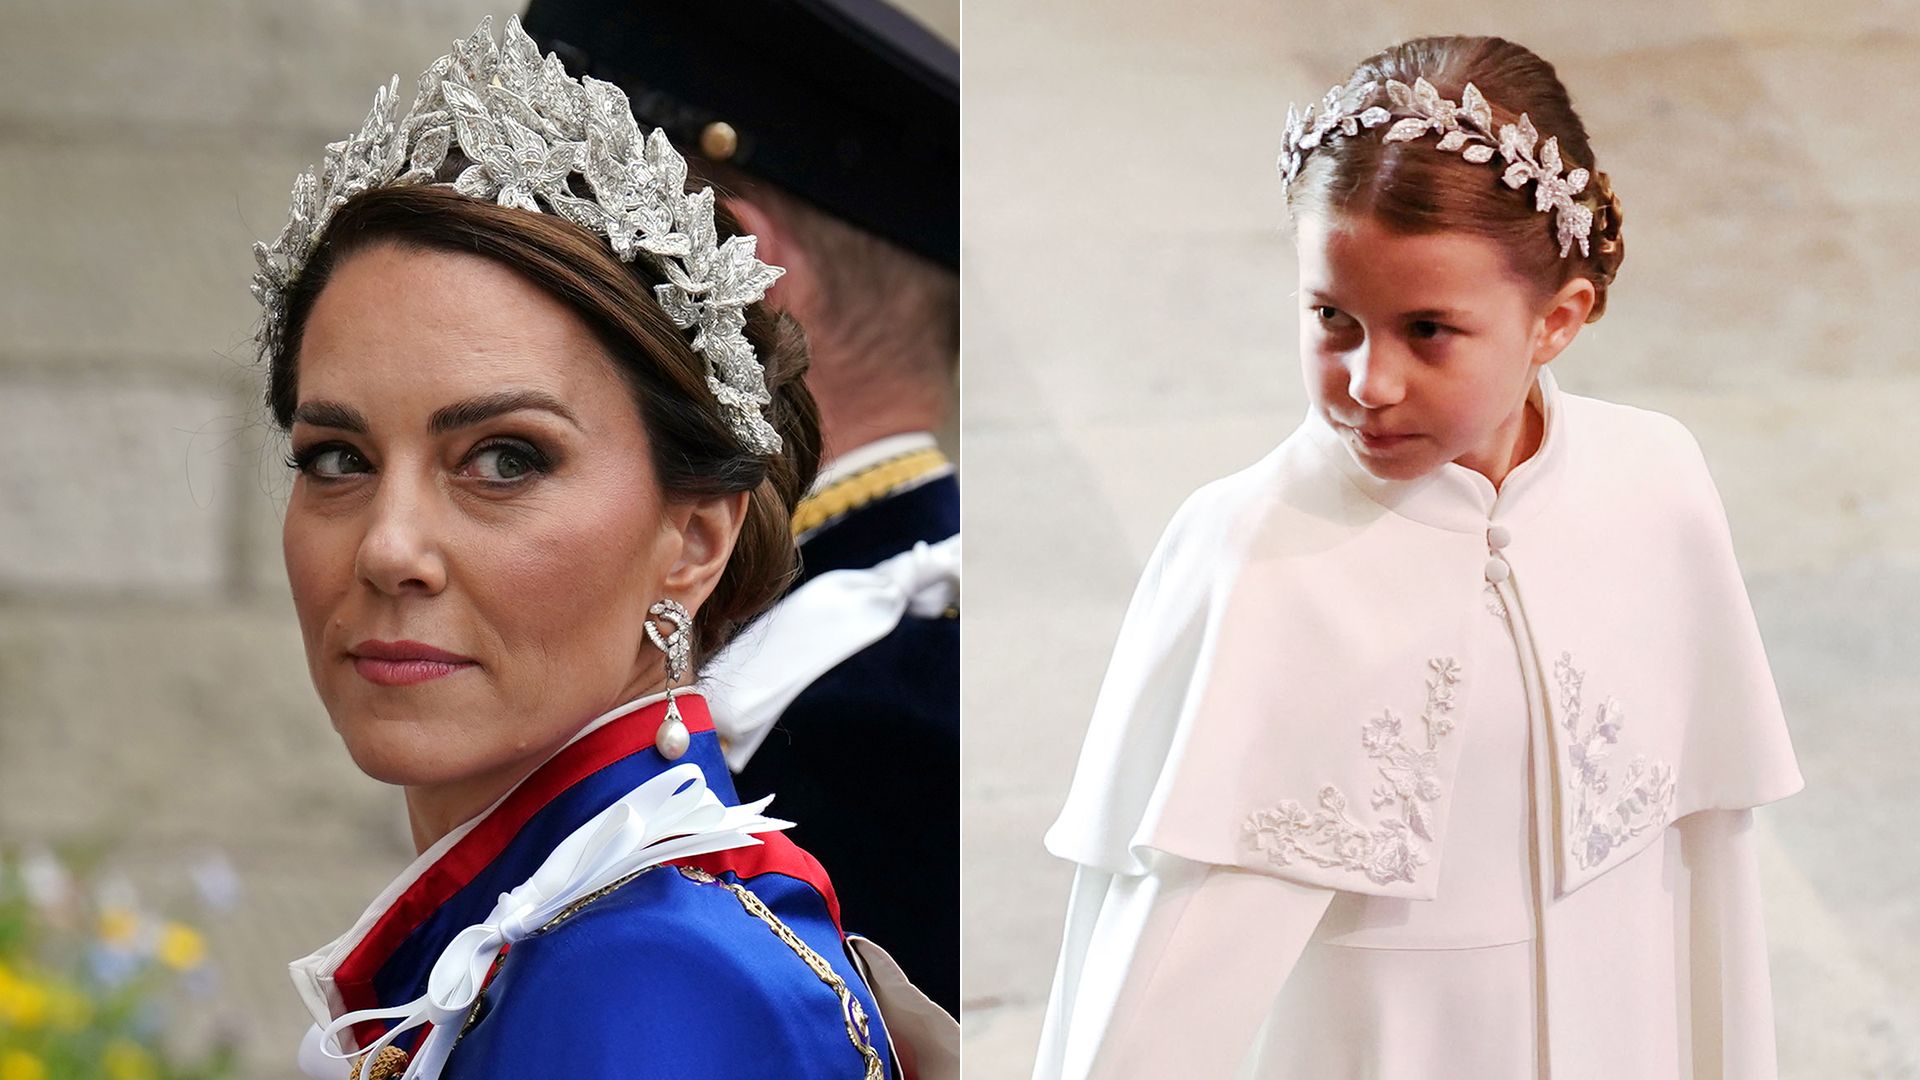 Princess of Wales and Princess Charlotte in matching headdresses